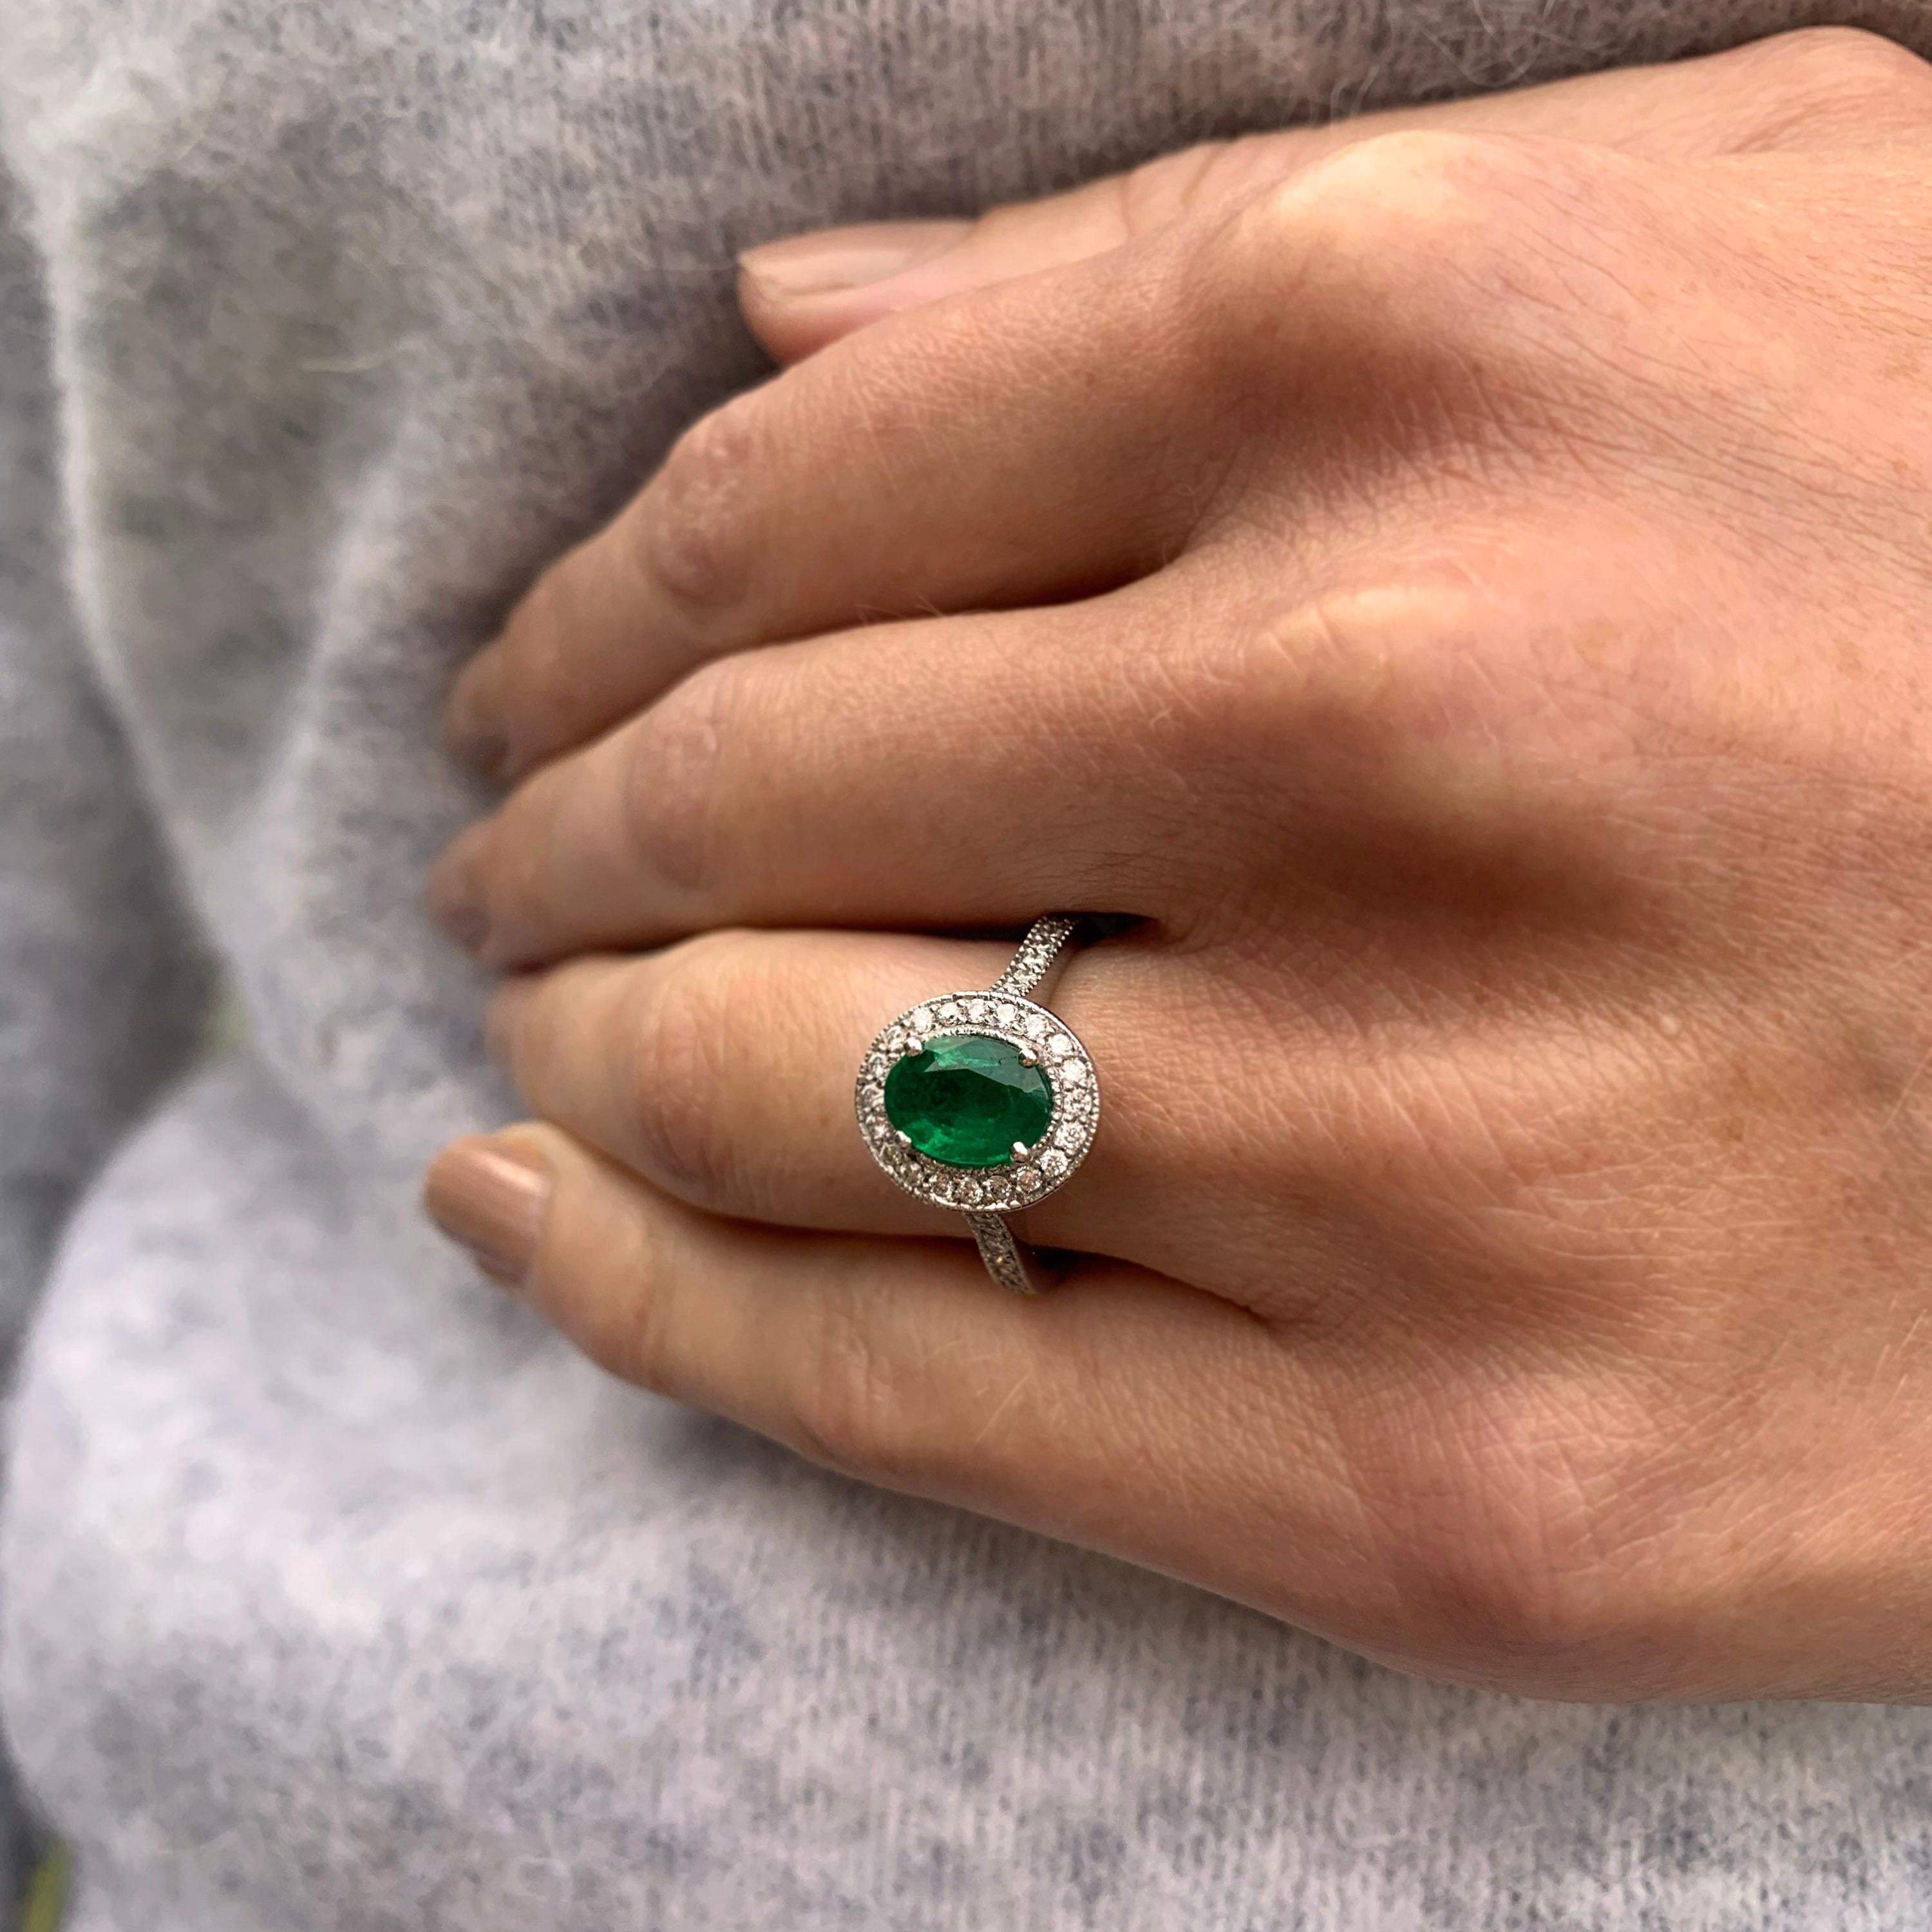 18 Karat White Gold Emerald and Diamond Ring In New Condition For Sale In Dublin 2, Dublin 2